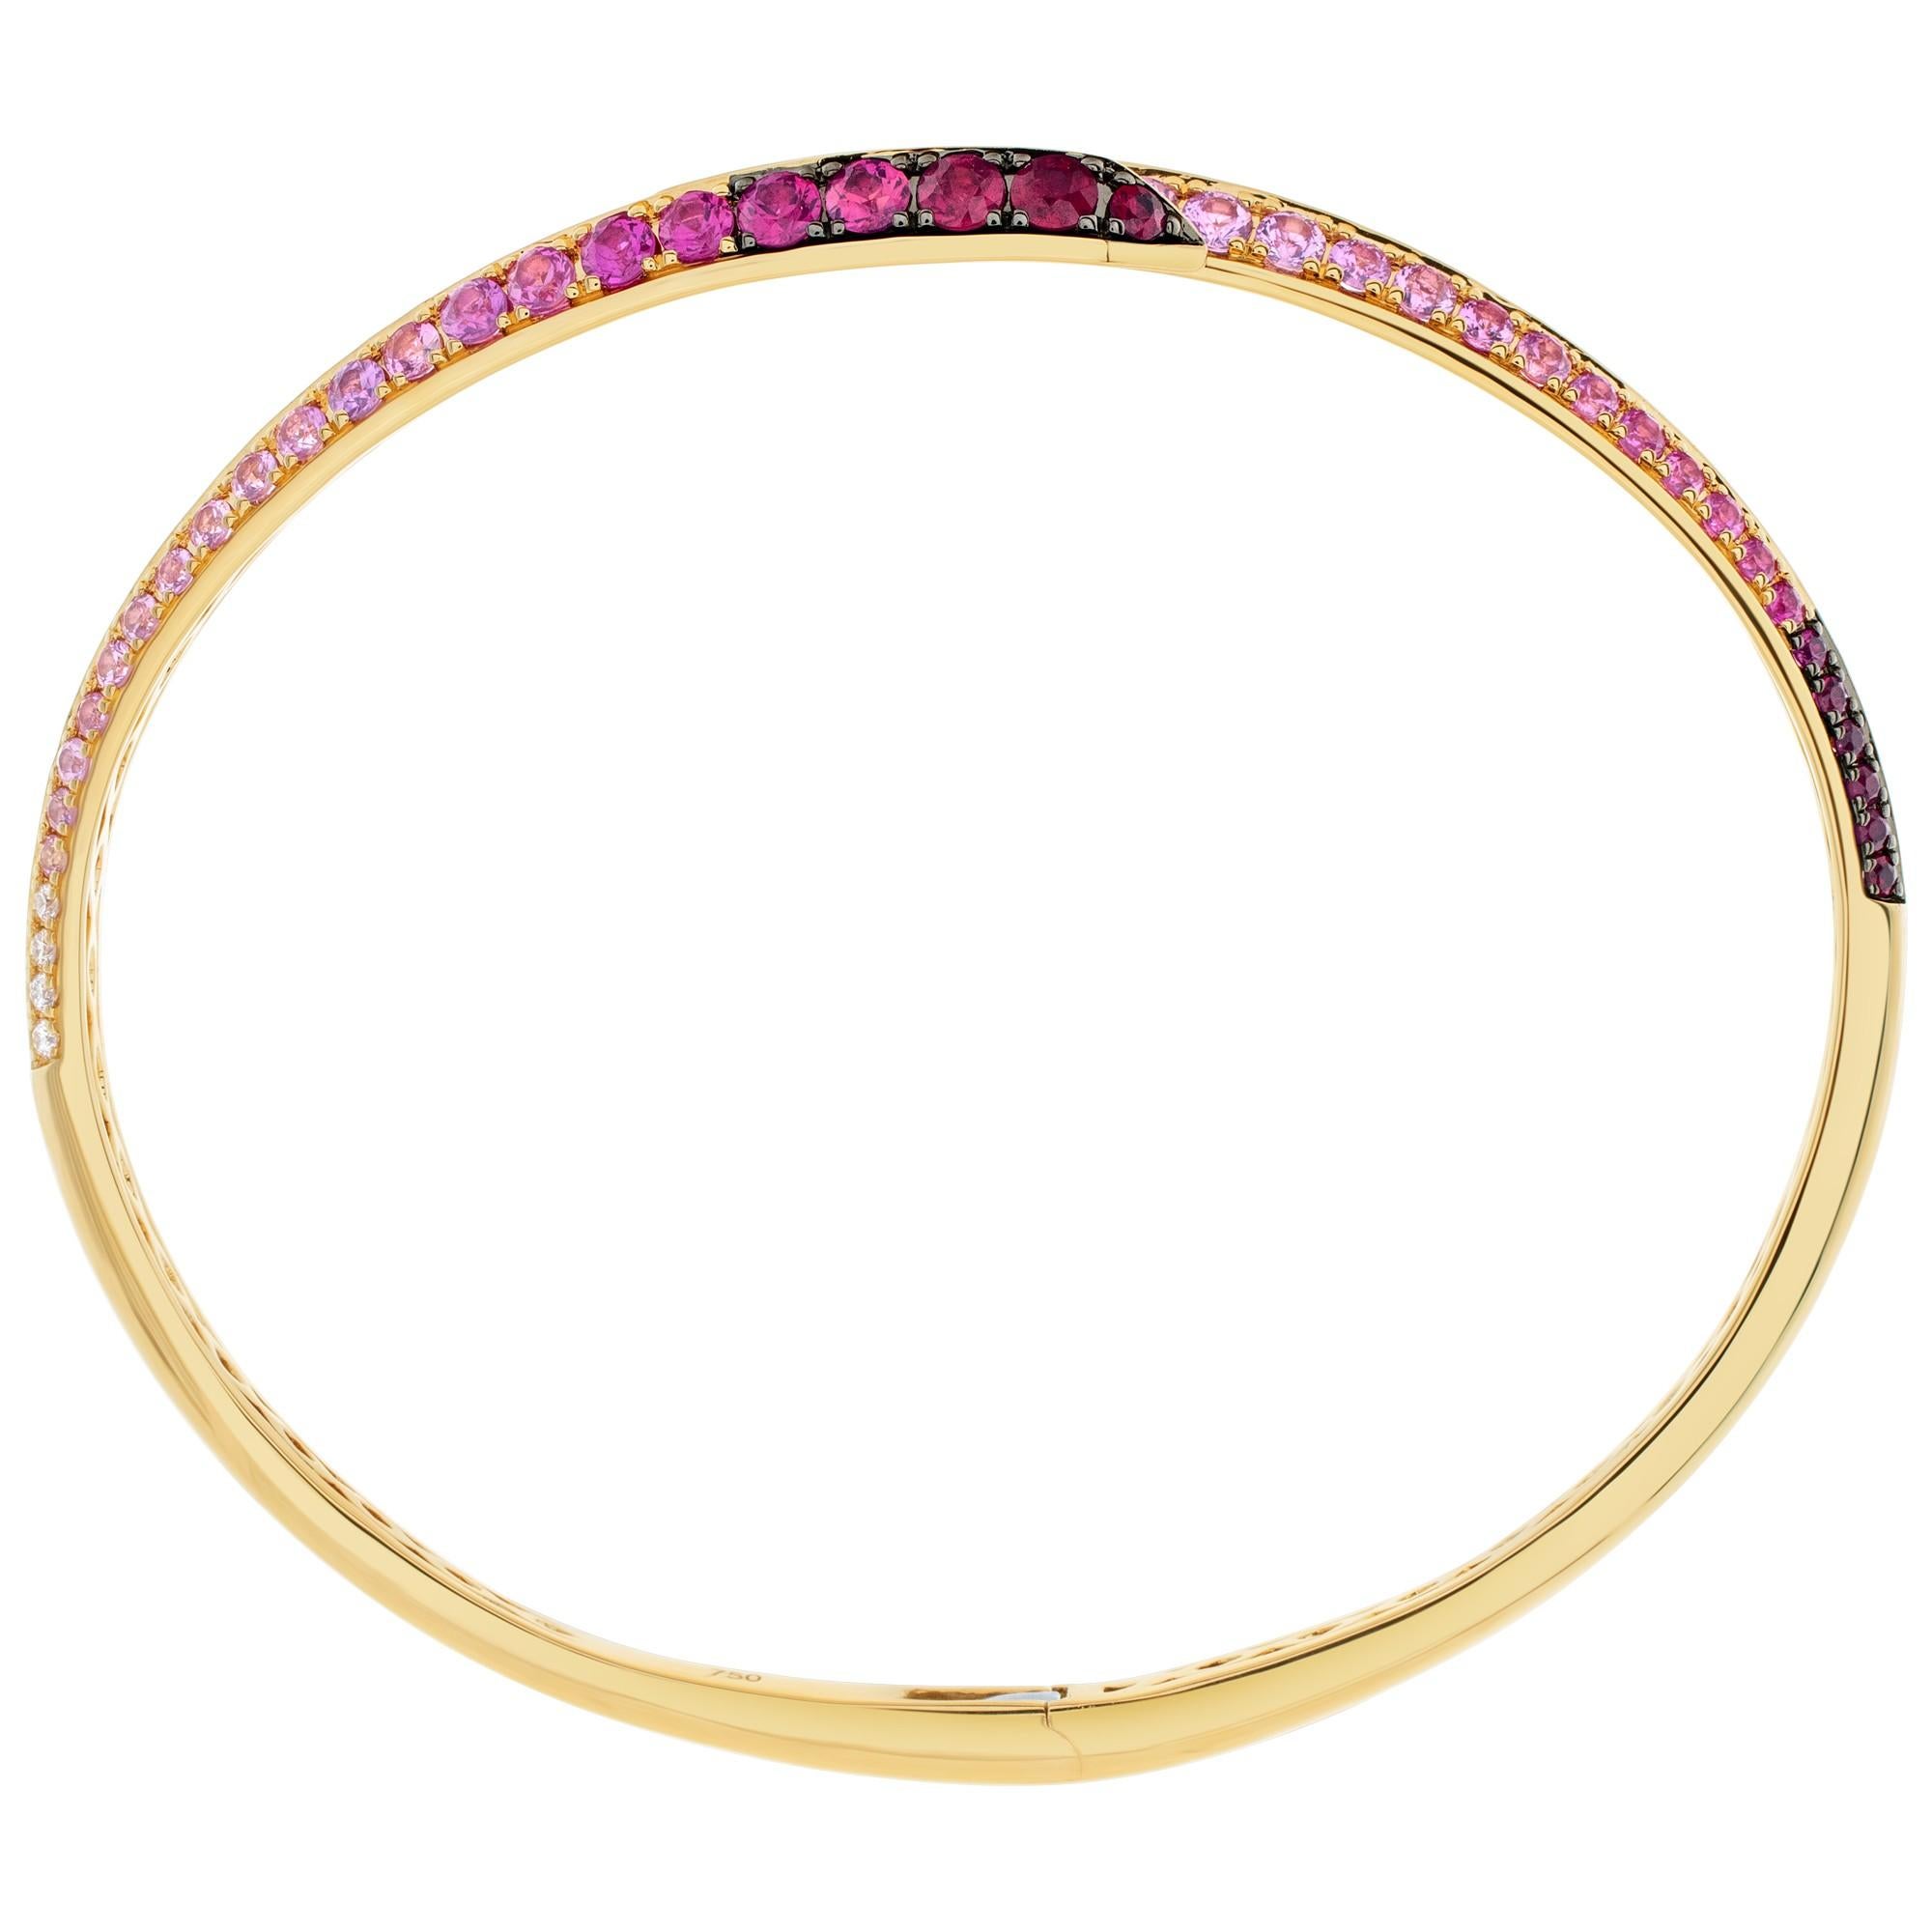 Gradient Pink Sapphires, Ruby and Diamond Hinged Bangle Set in 18k Yellow Gold 1